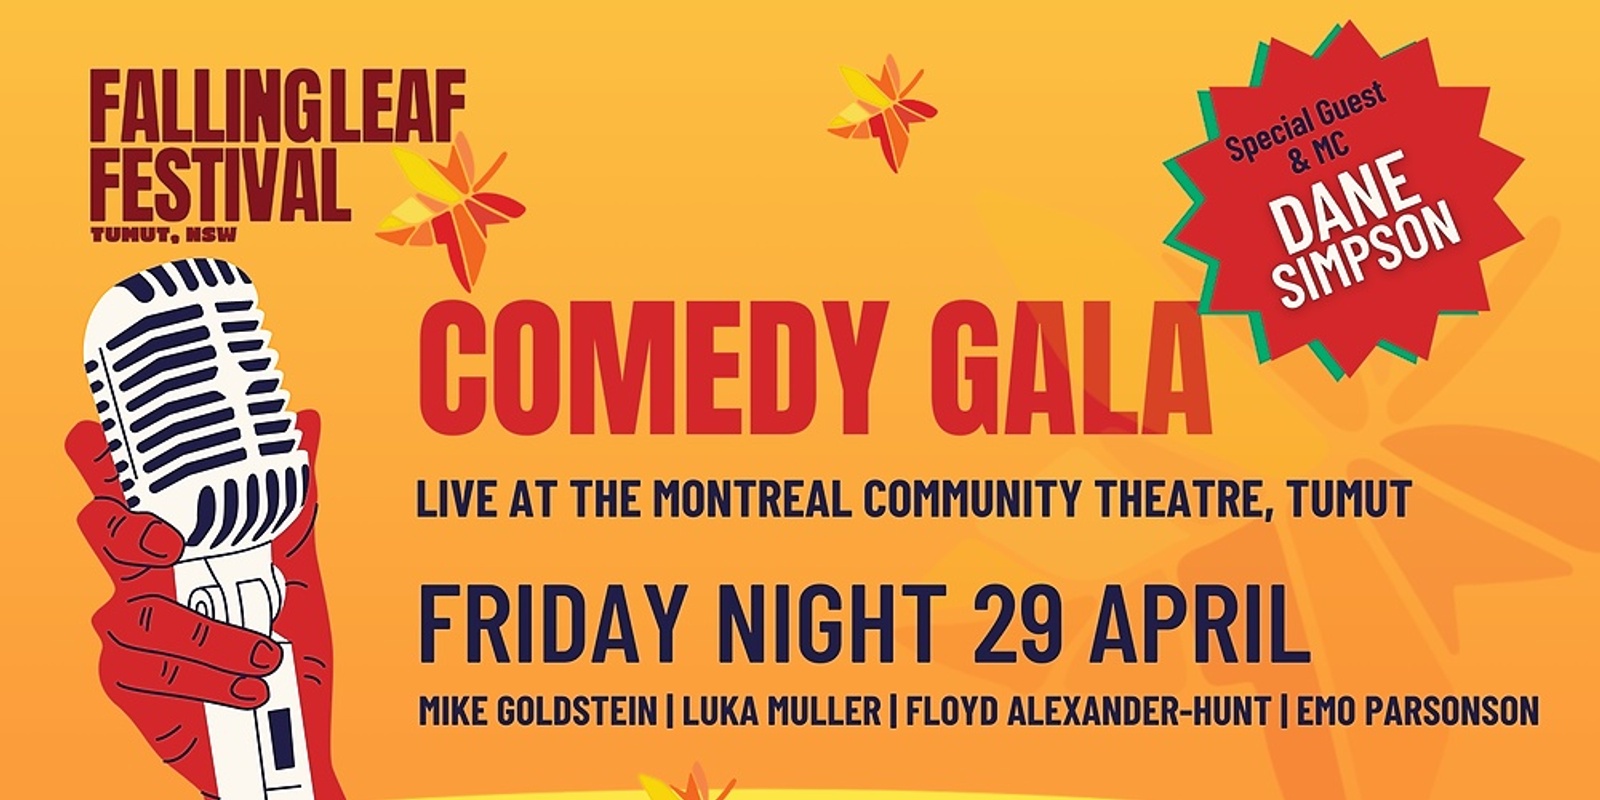 Banner image for Falling Leaf Comedy Gala 2022